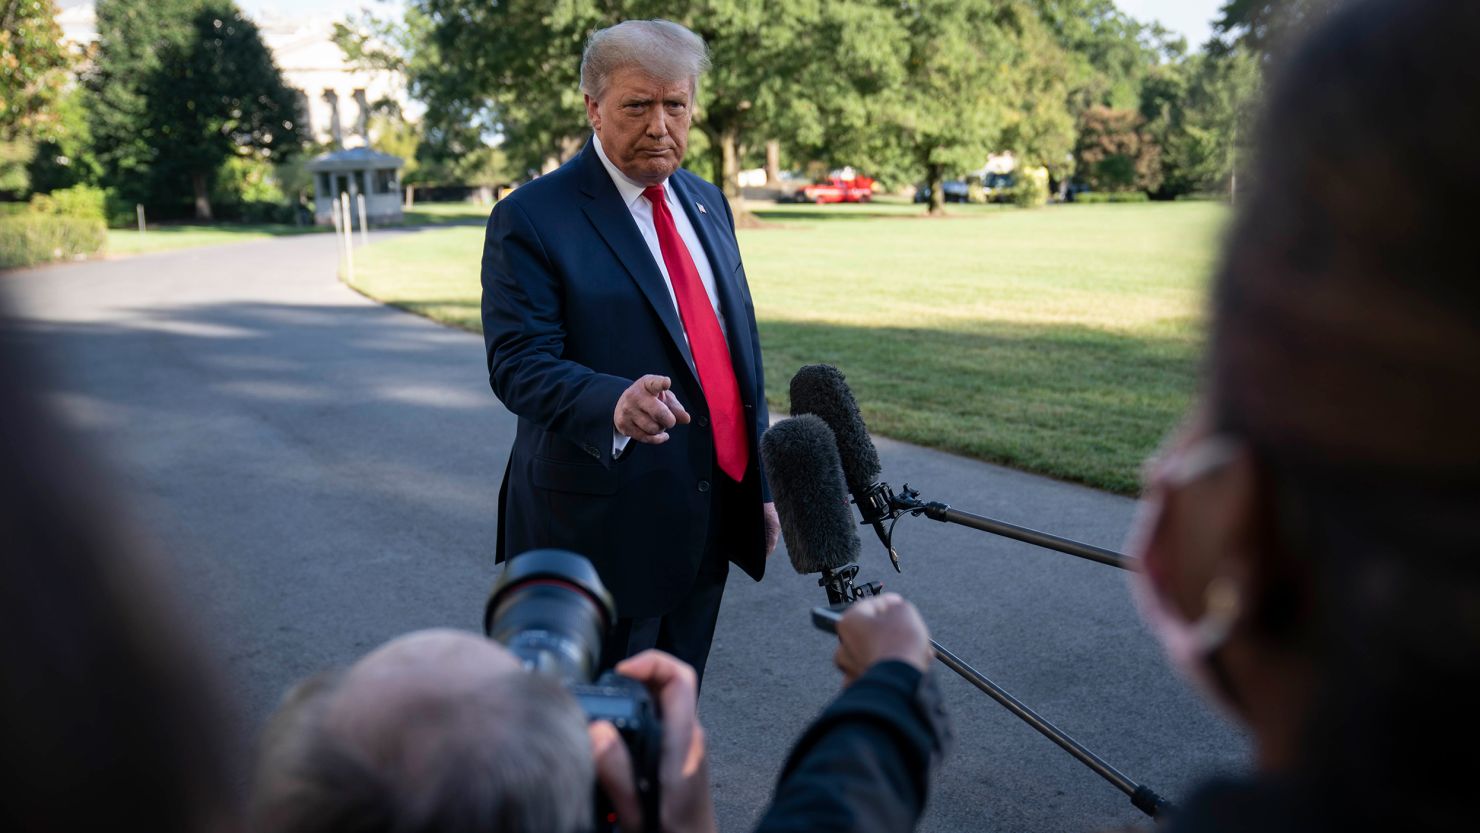 Trump speaks to the press before his departure from the White House on Saturday for a North Carolina campaign rally. (Photo by Sarah Silbiger/Getty Images)